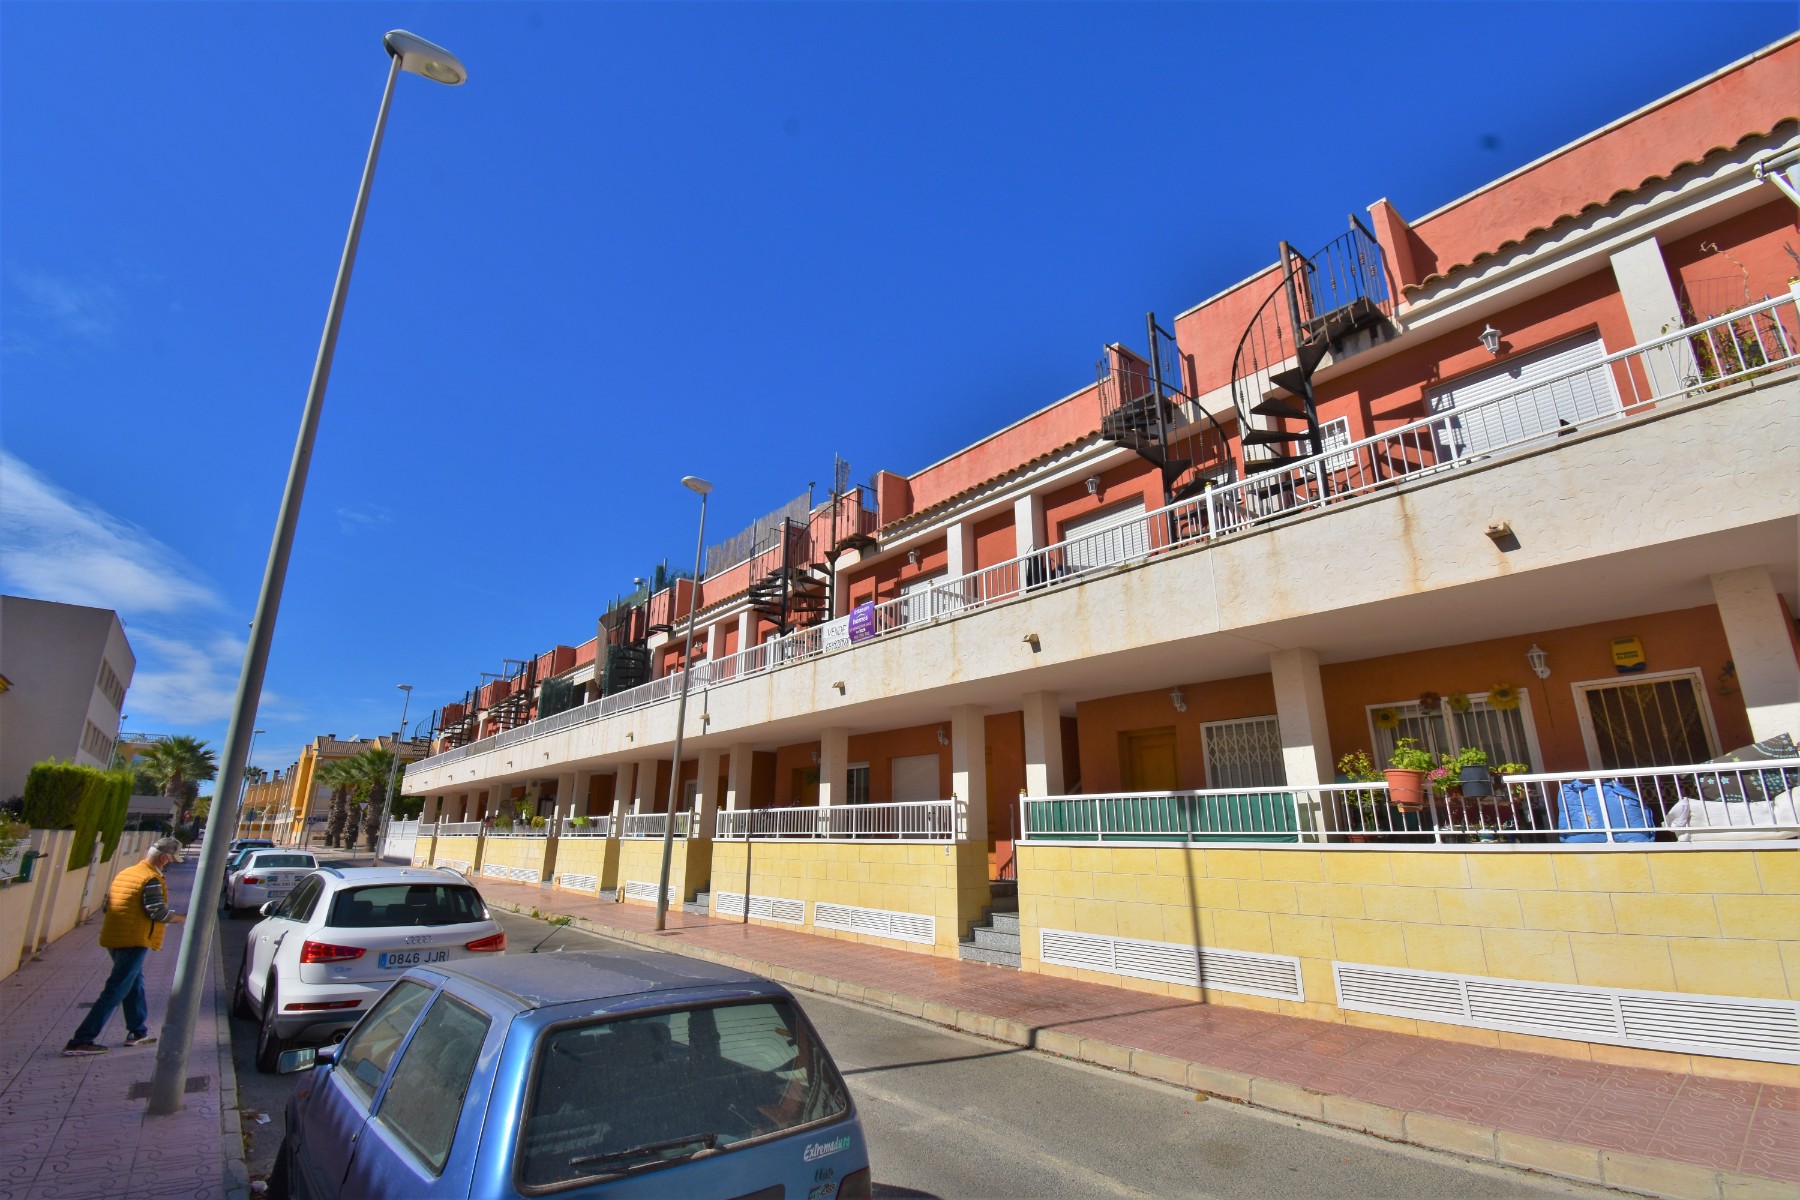 For sale: 2 bedroom apartment / flat in Rojales, Costa Blanca